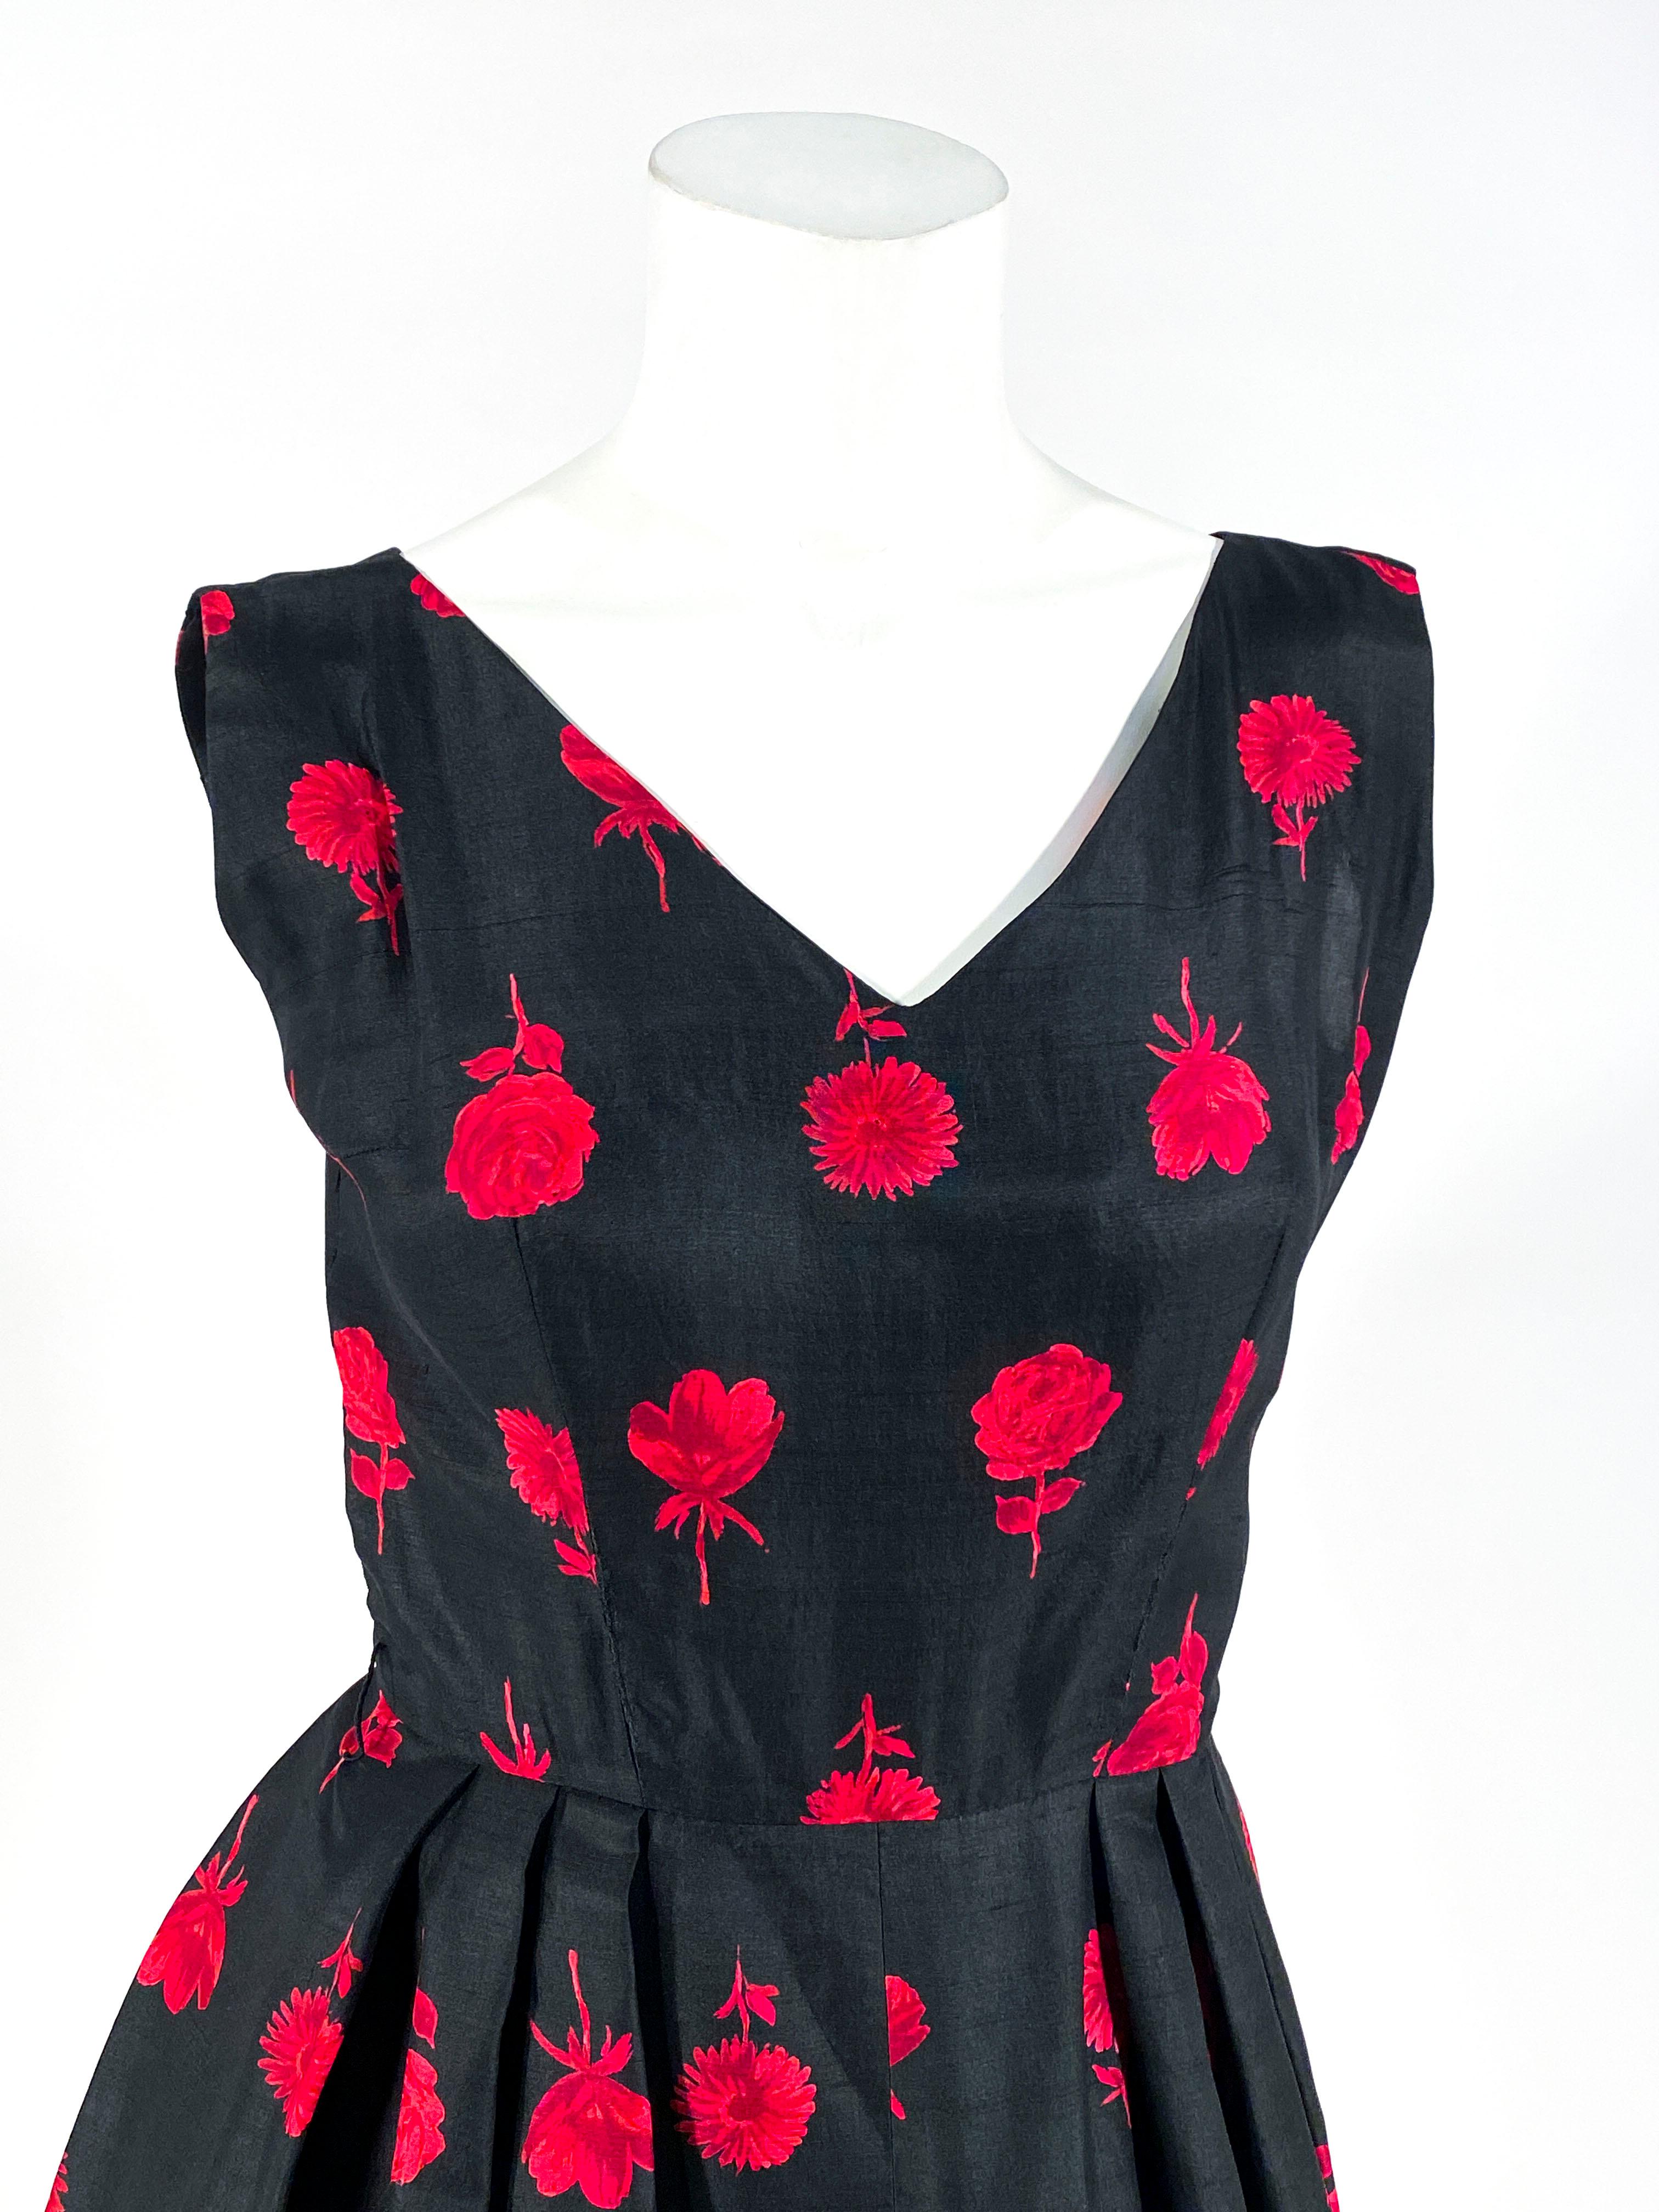 Women's 1950s Black and Red Floral Printed Silk Dress and Bolero